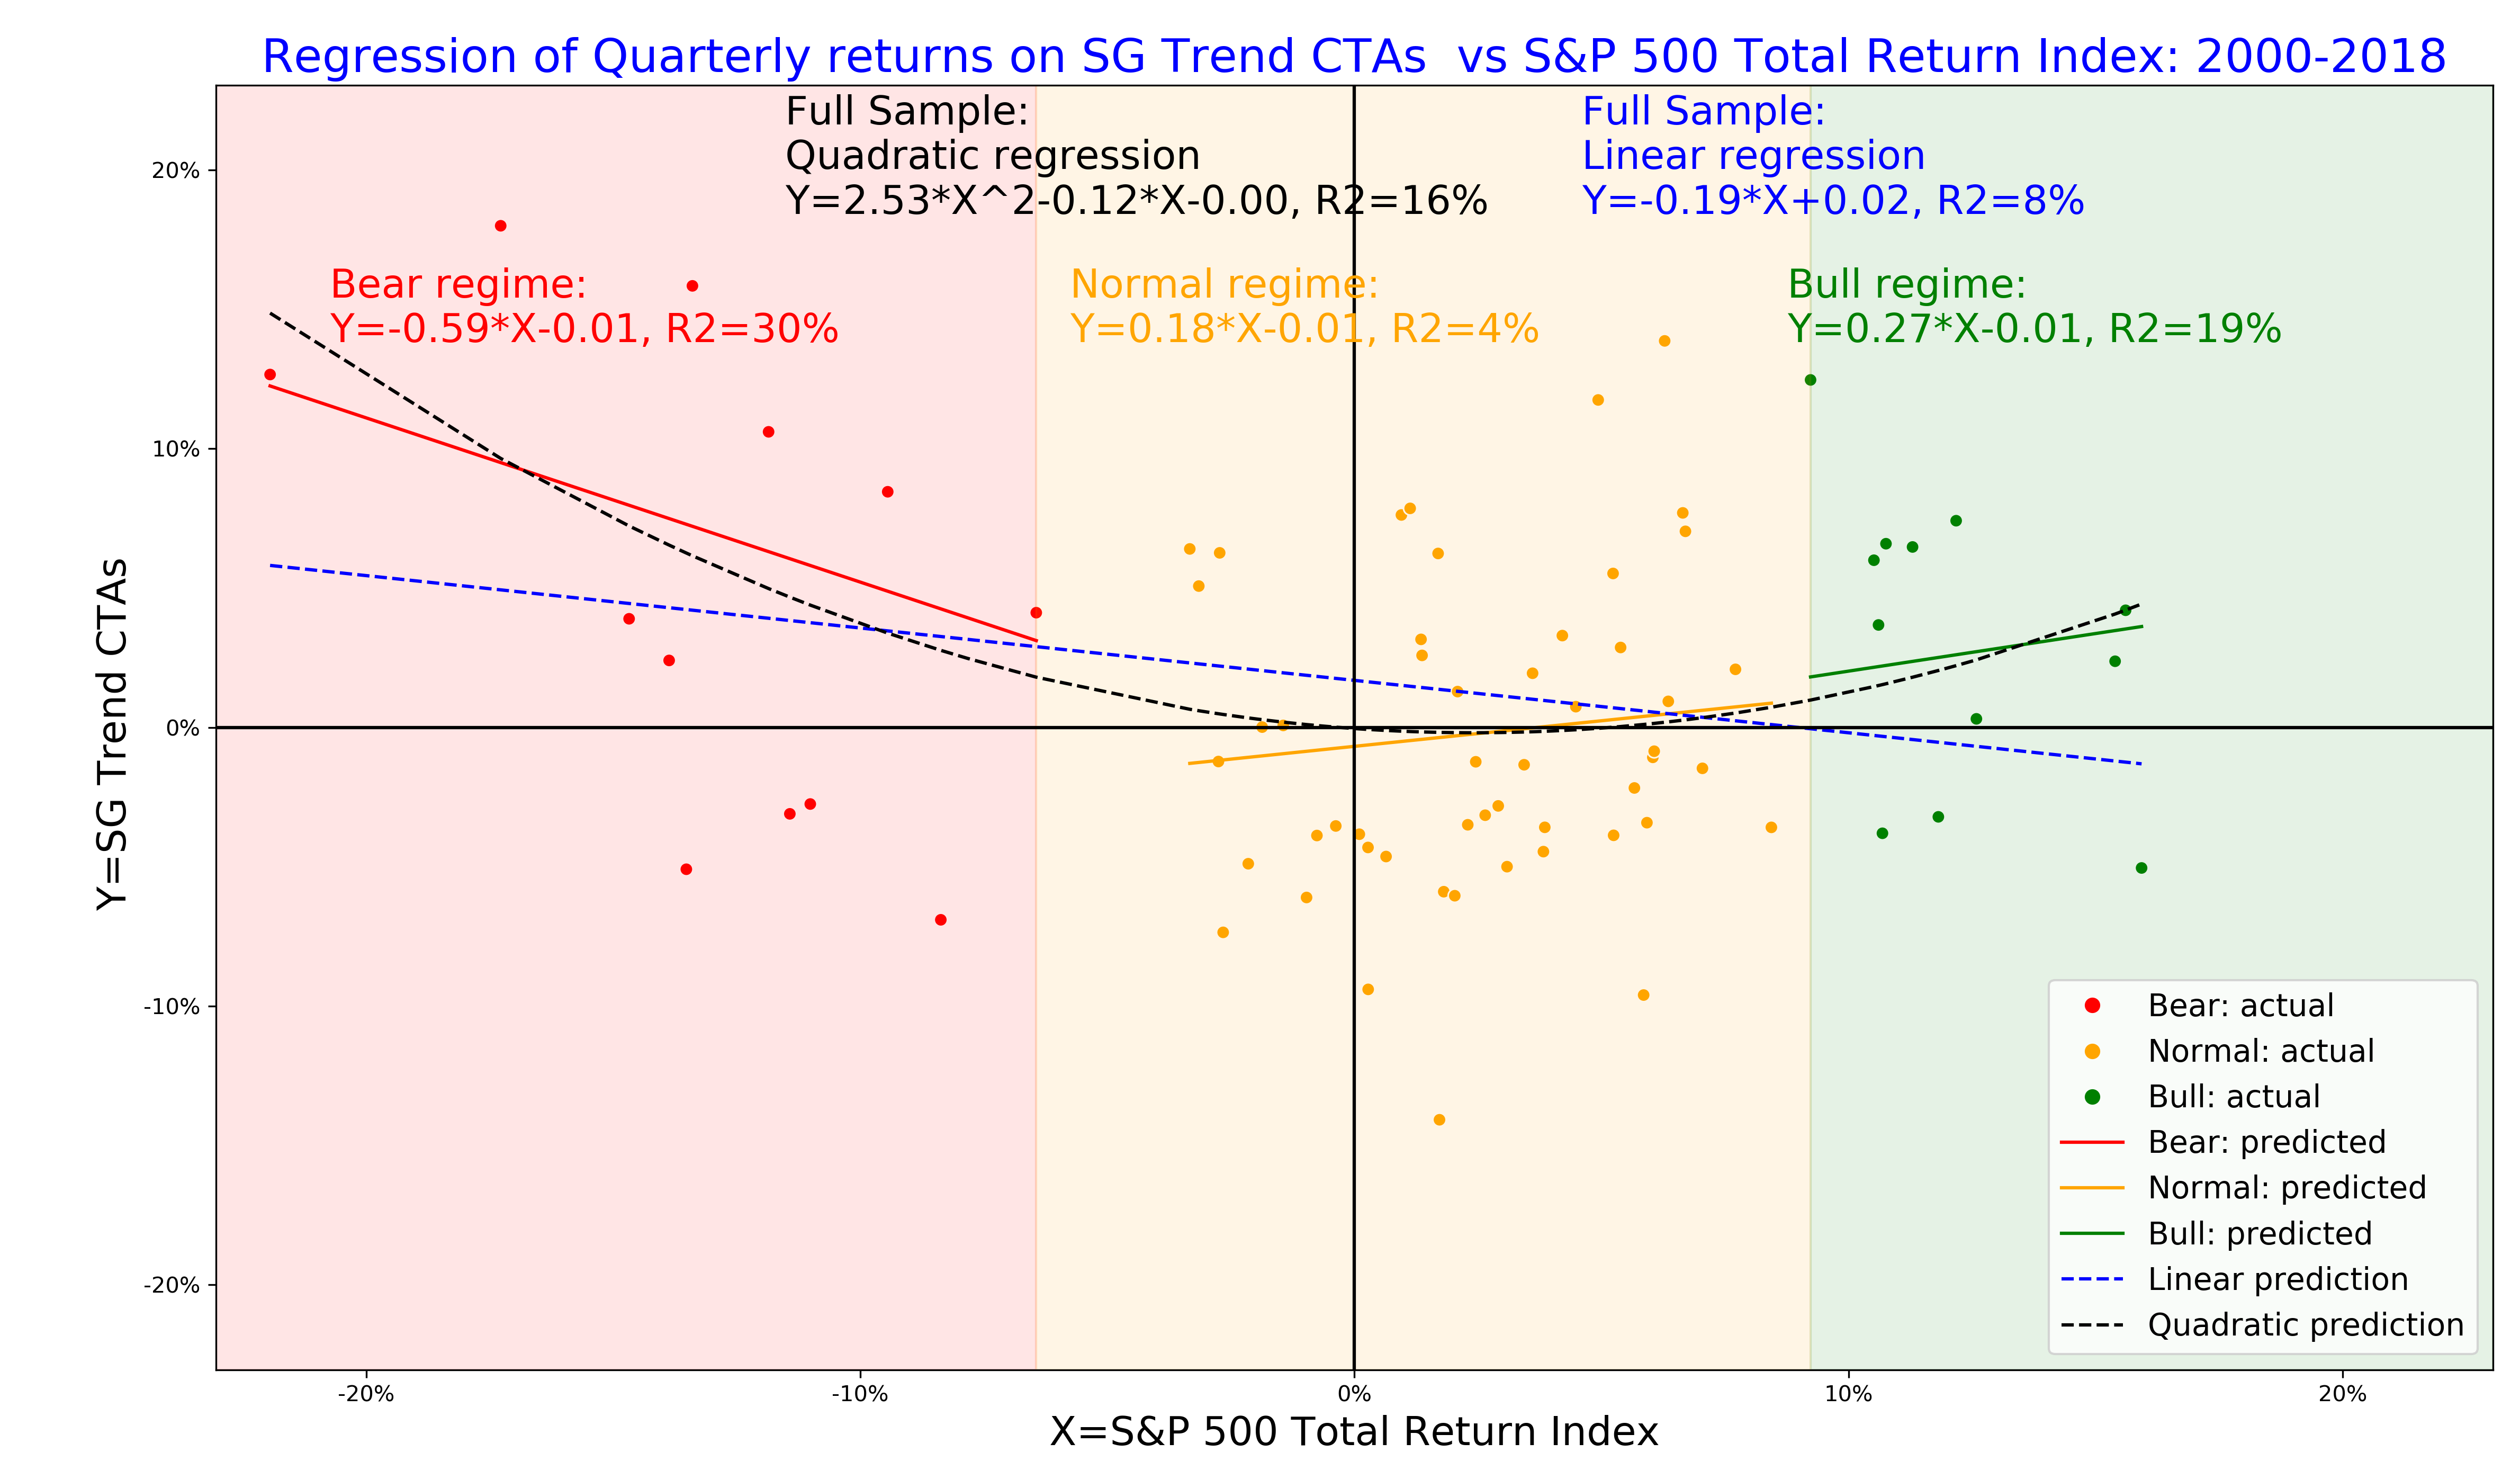 The linear, quadratic and regime-conditional regression models for quarterly returns of SG Trend index (NEIXCTAT Index) explained by returns of S&P 500 index, 2000-2018.